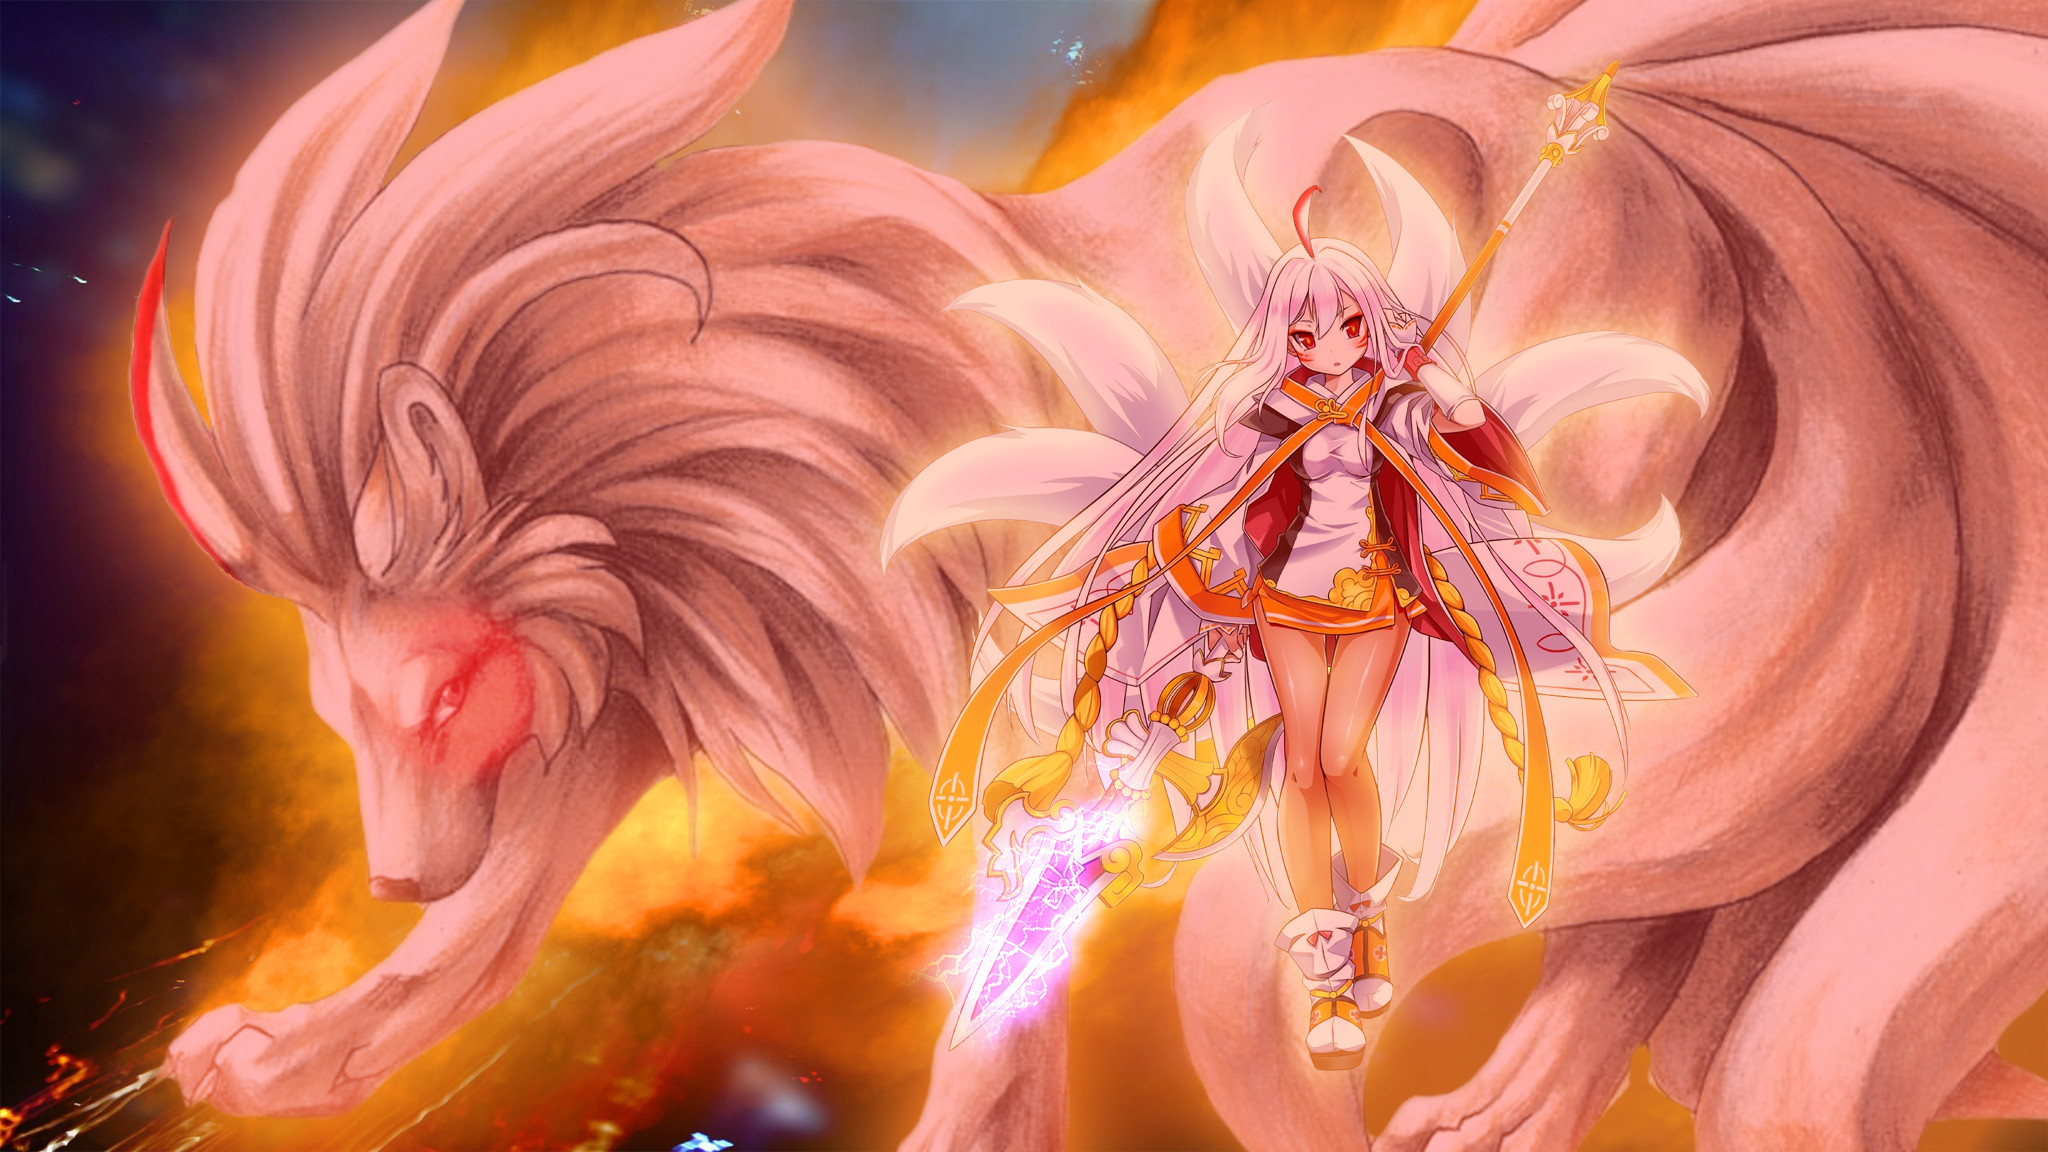 Nine Tails Wallpapers 52 Pictures.